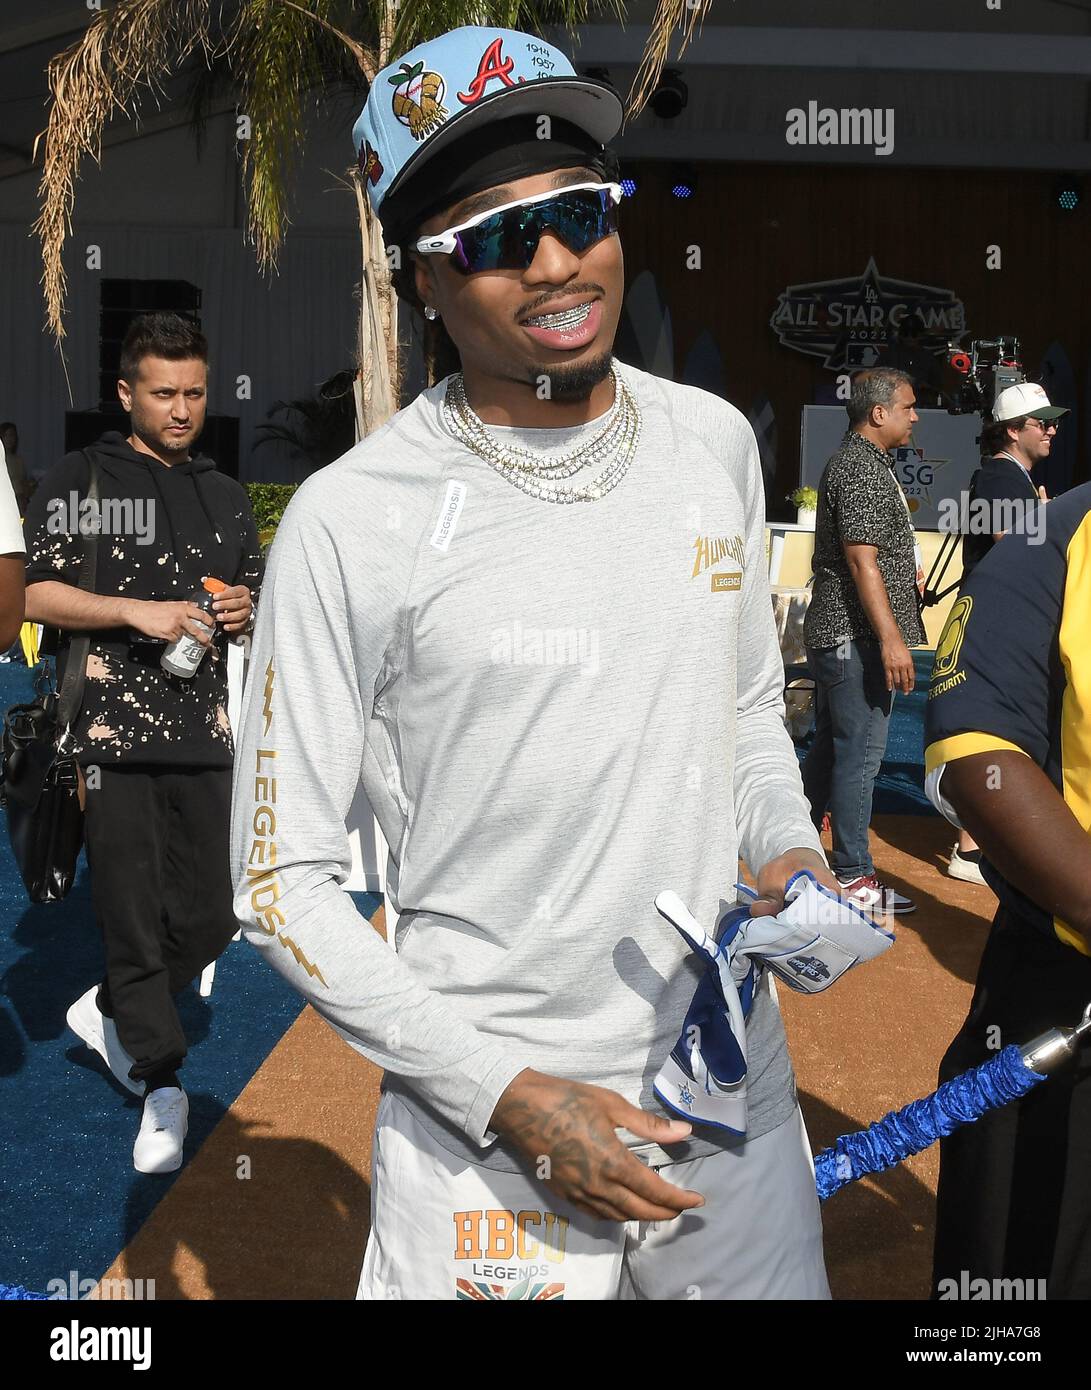 Los Angeles, USA. 16th July, 2022. Jerry Lorenzo at the 2022 MLB All-Star  Celebrity Softball Game Media Availability held at the 76 Station - Dodger  Stadium Parking Lot in Los Angeles, CA